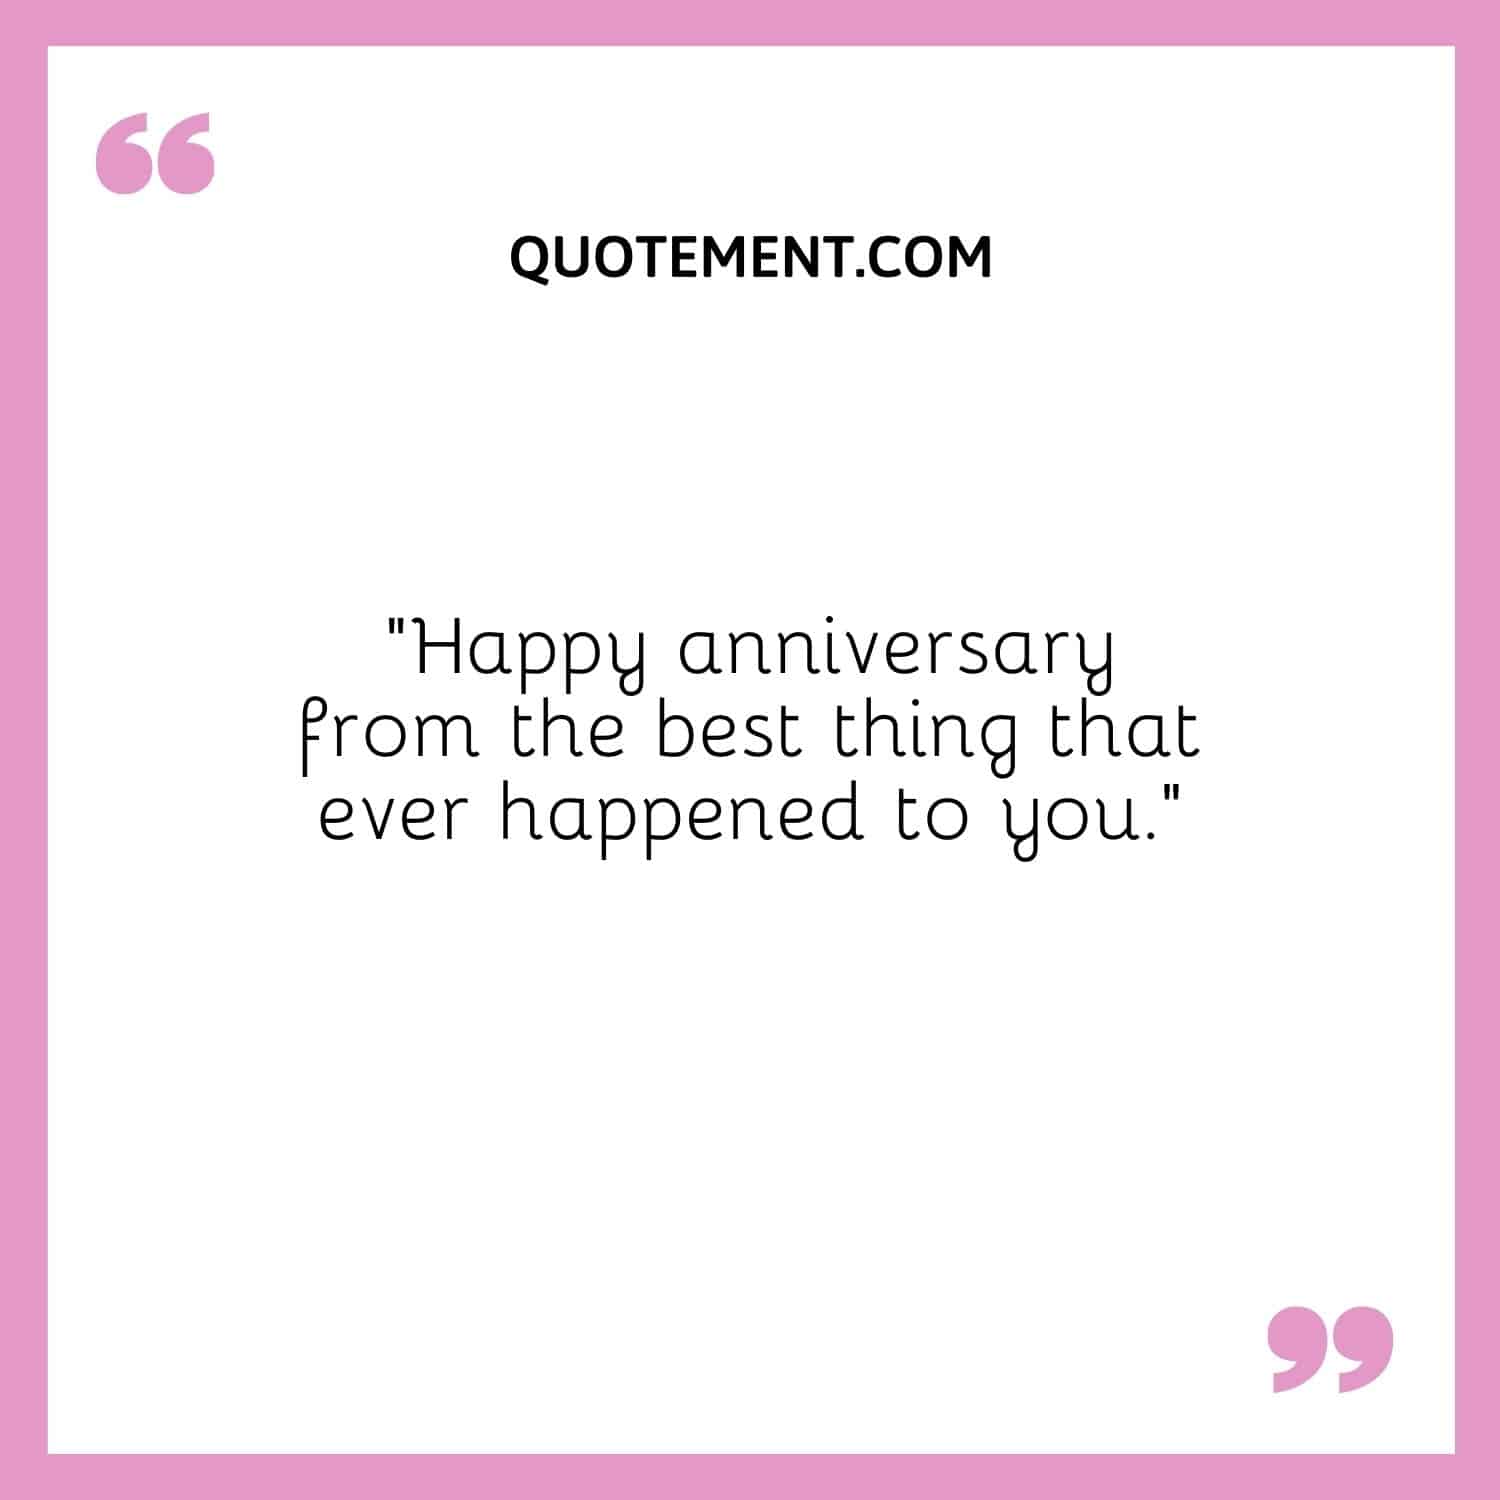 “Happy anniversary from the best thing that ever happened to you.”